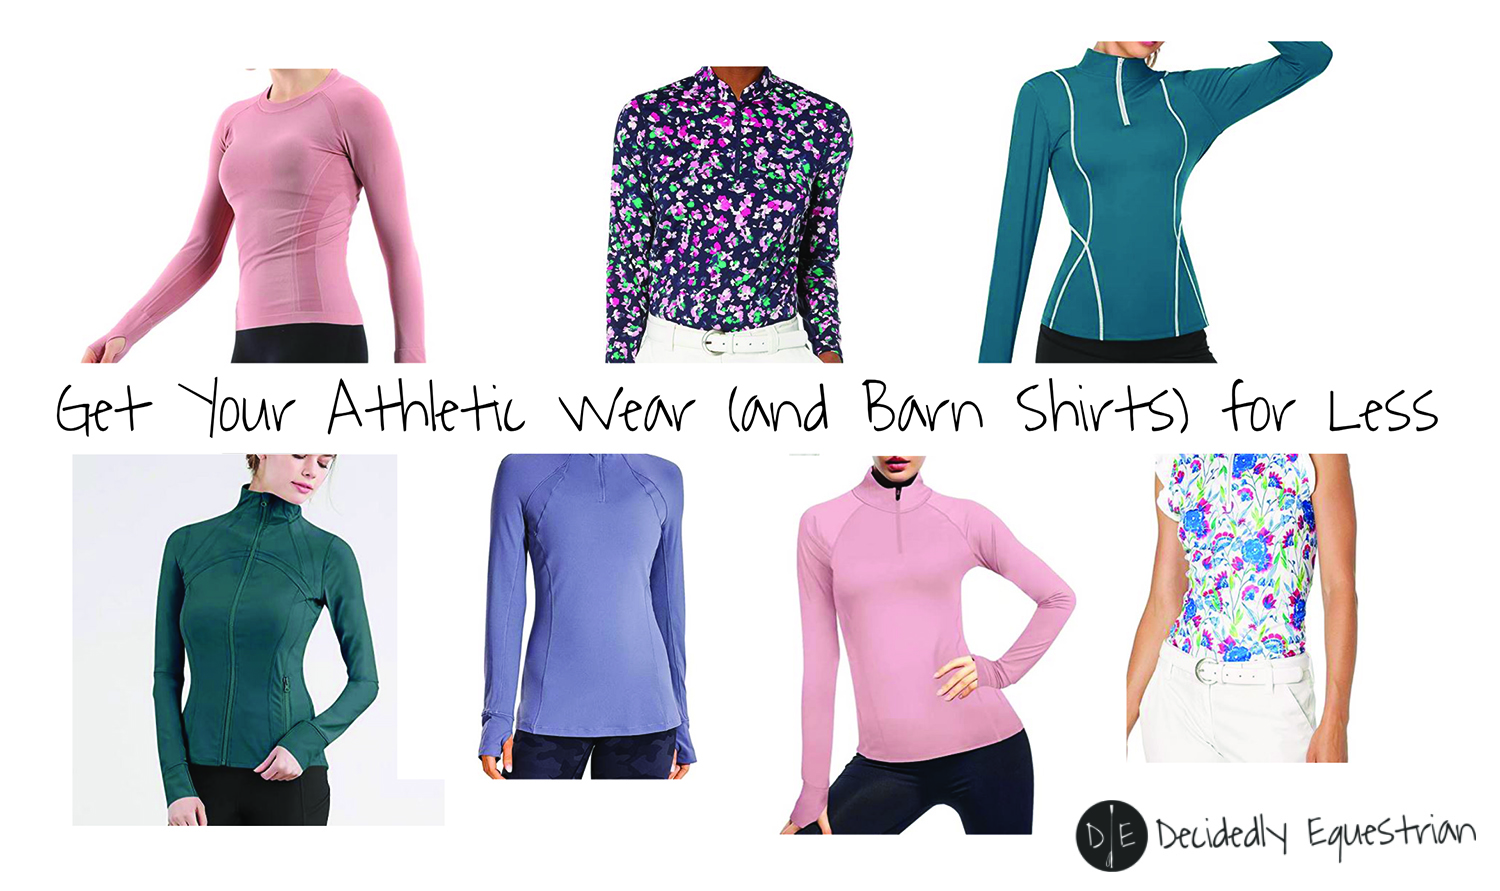 Get Your Athletic Wear (and Barn Shirts) for Less